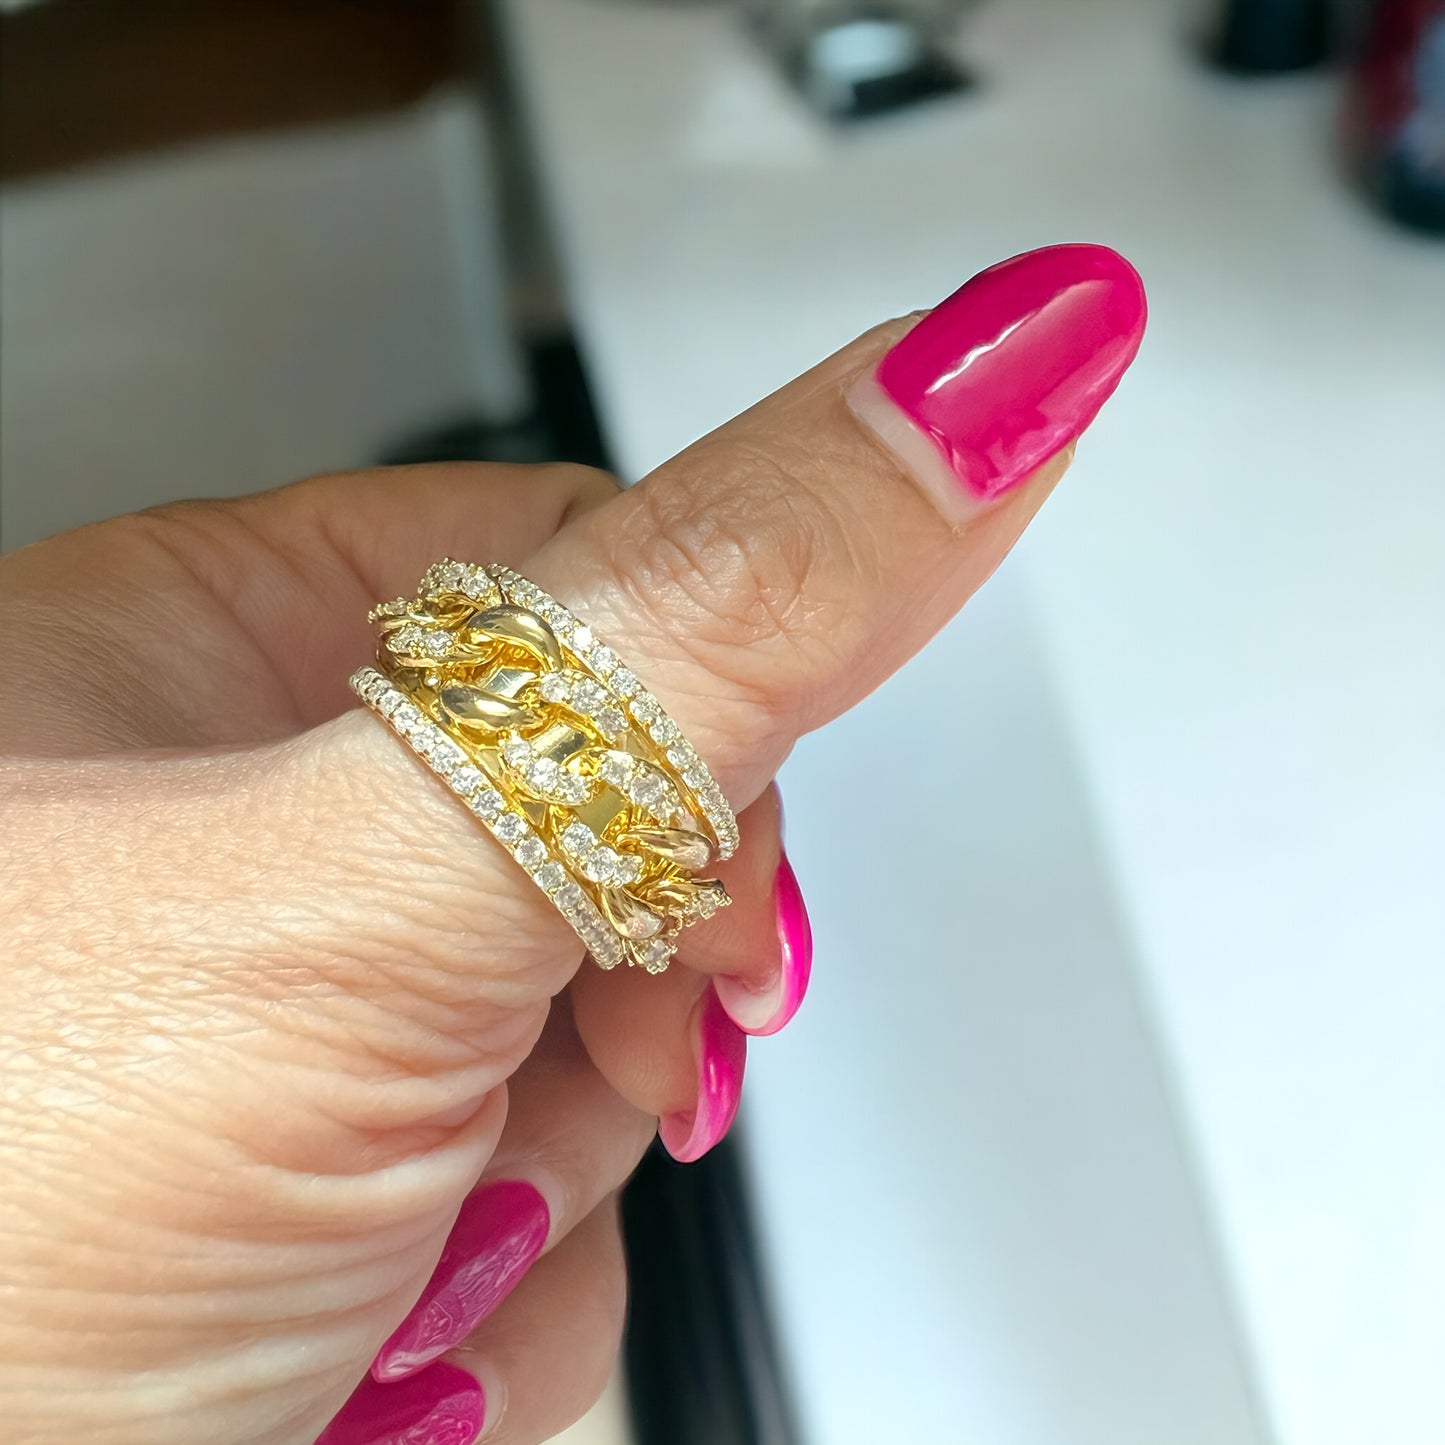 Fashionable Fidget: Gold-Plated Ring with Unique Chain Design – Elevate Your Style with a Touch of Playful Elegance